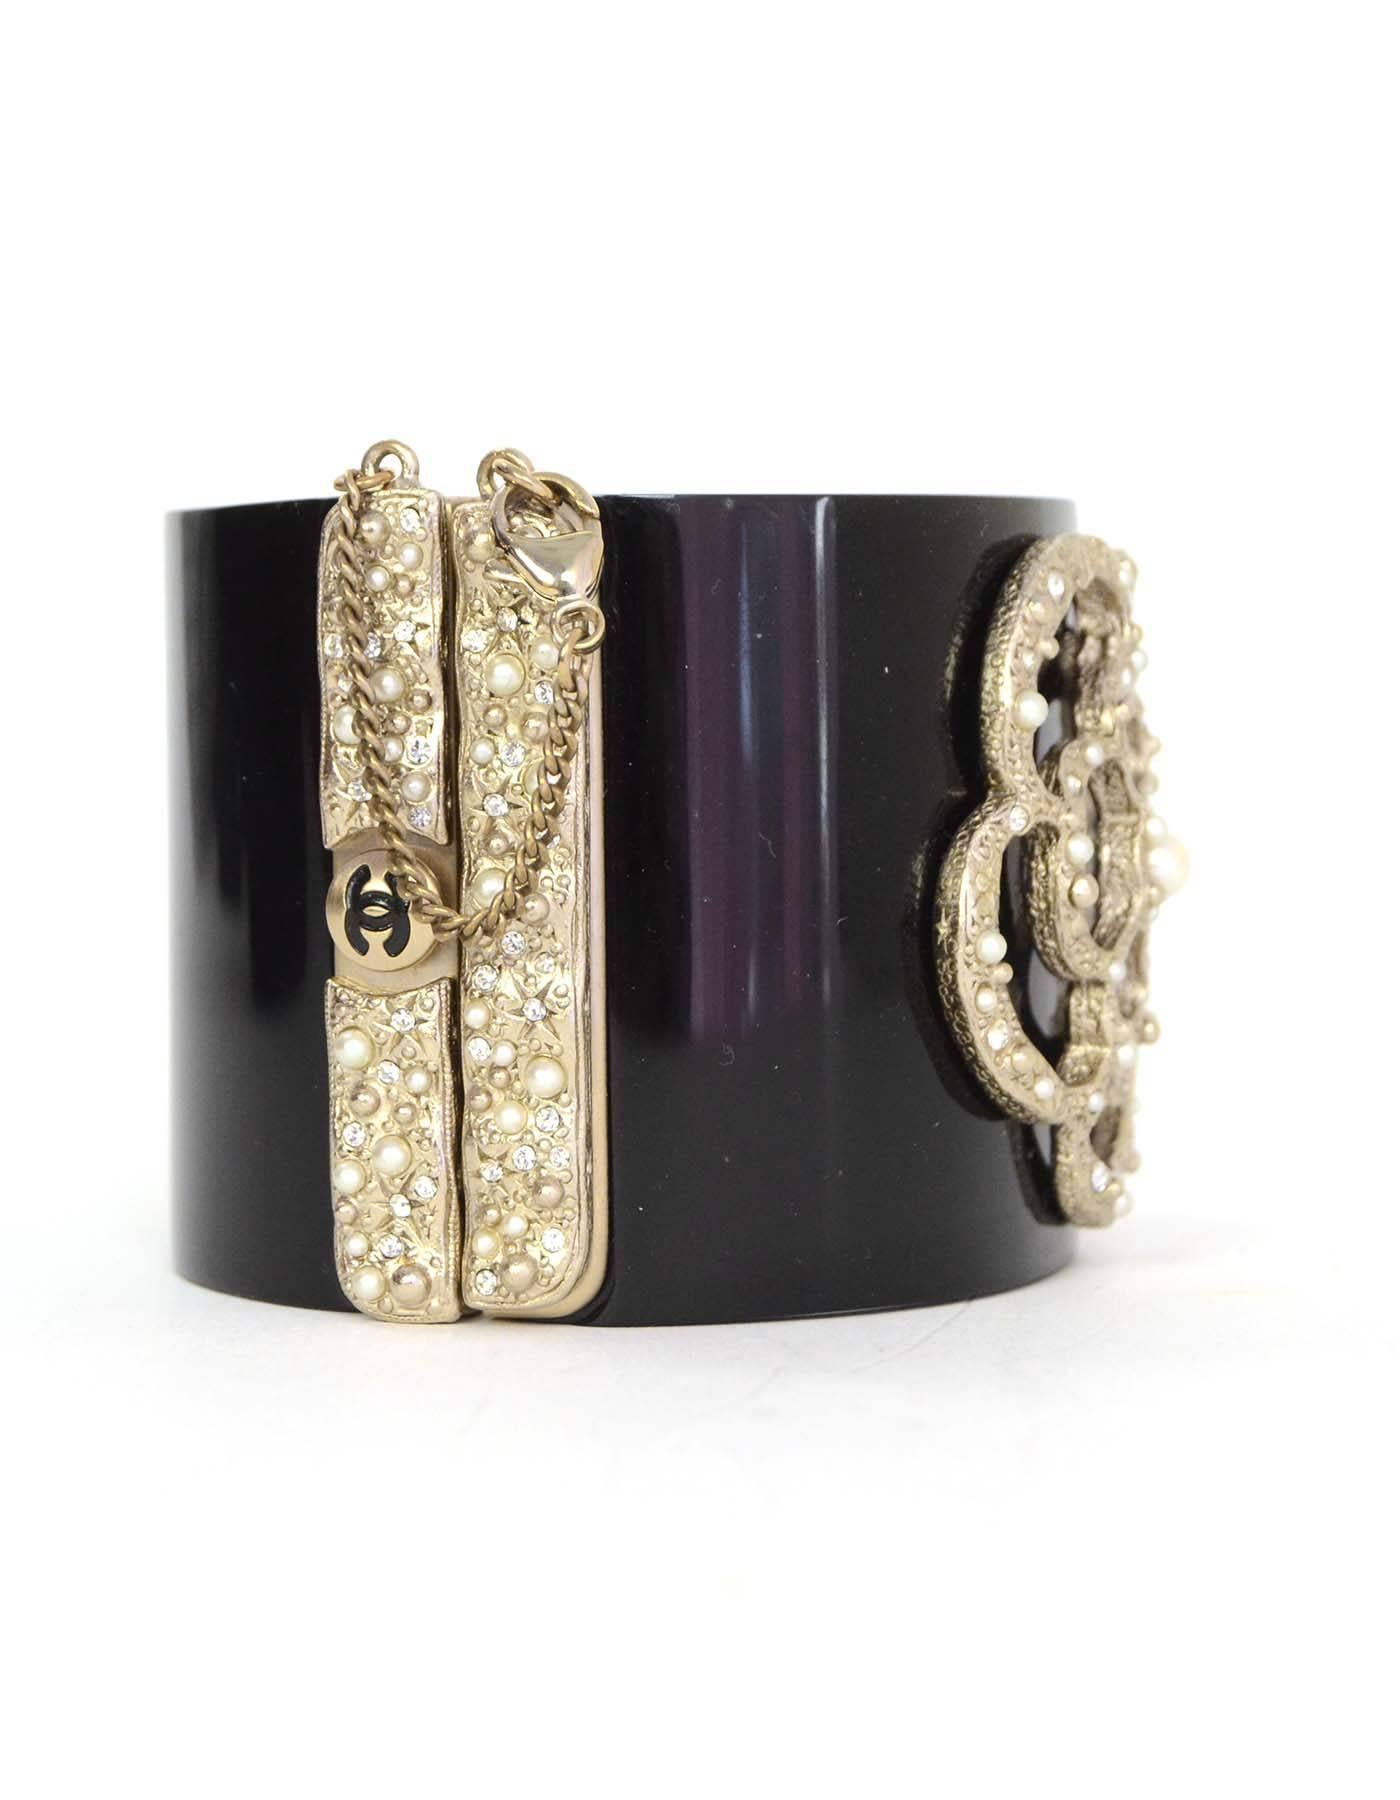 Chanel Black Resin & Textured Gold Camelia Cuff
Features pearl and crystal detailing throughout hardware and camelia flower
Made In: France
Year of Production: 2013
Color: Black, pale gold, and ivory
Materials: Resin, metal, faux pearl and